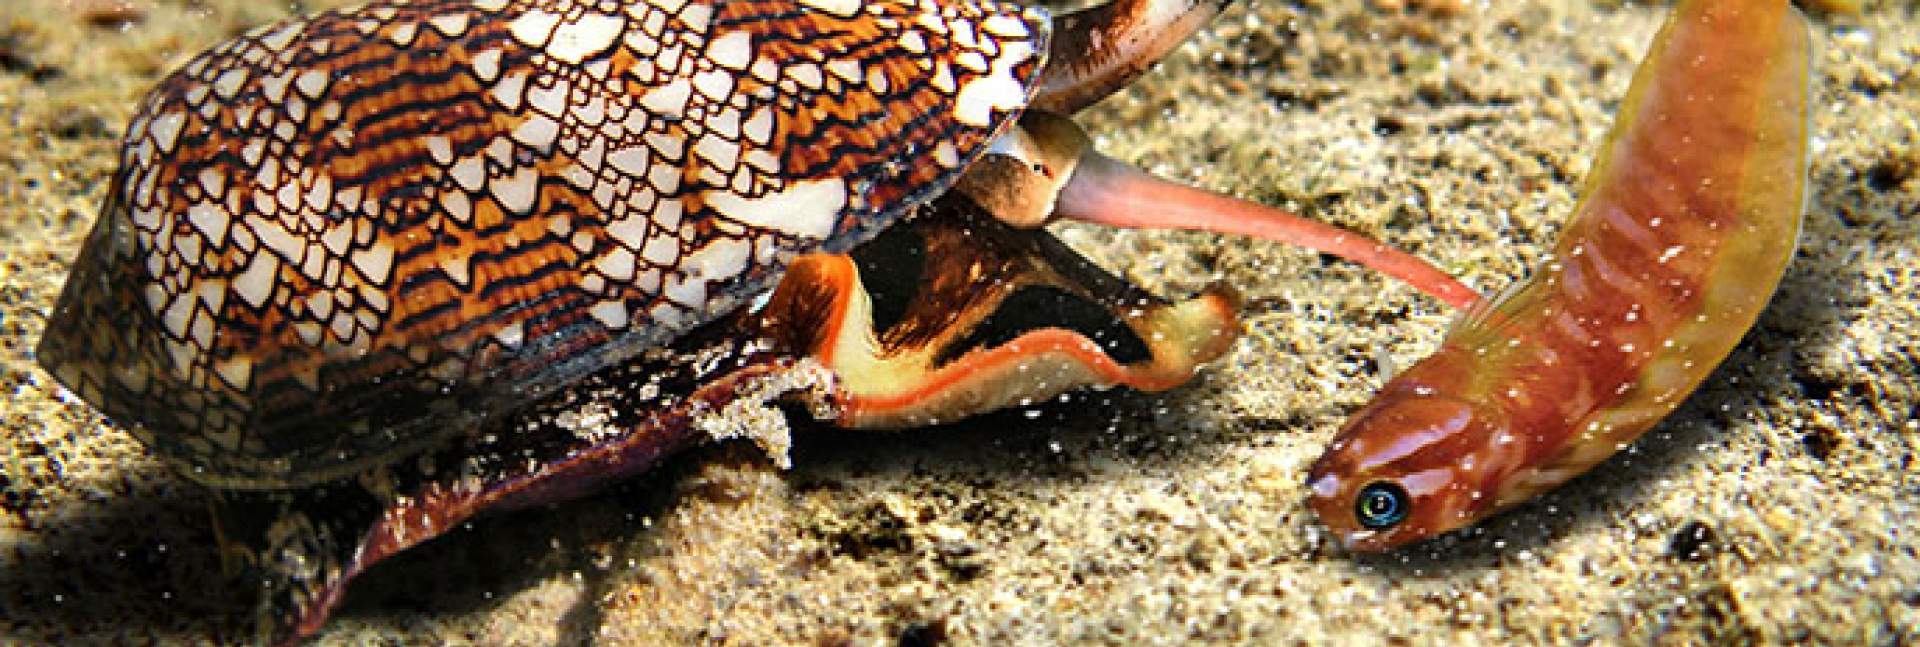 cone snail and prey